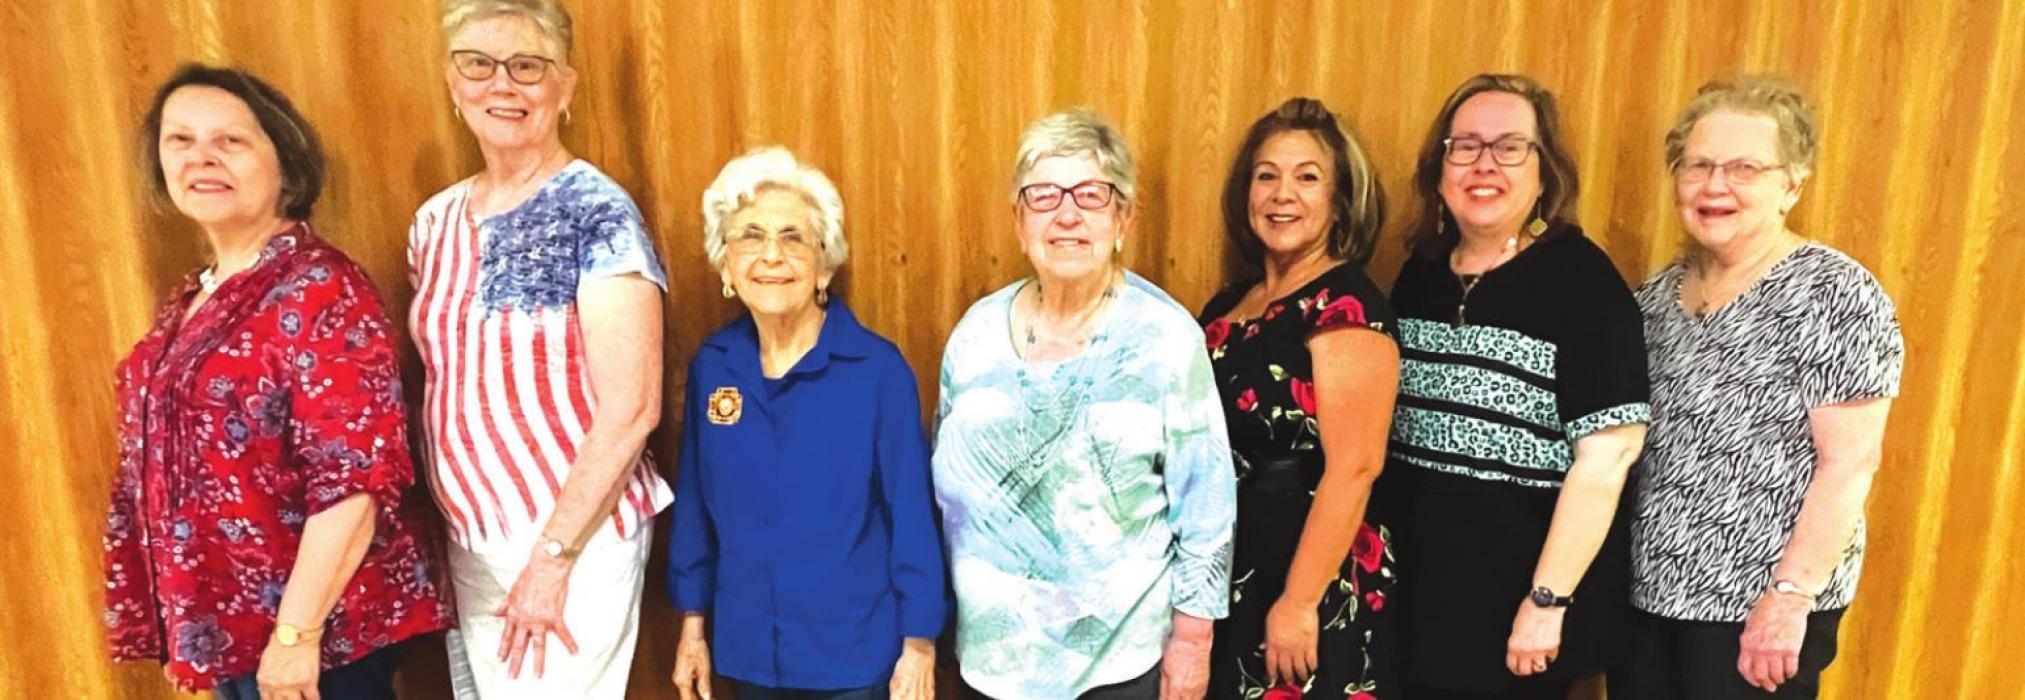 VFW Auxiliary Installs New Officers